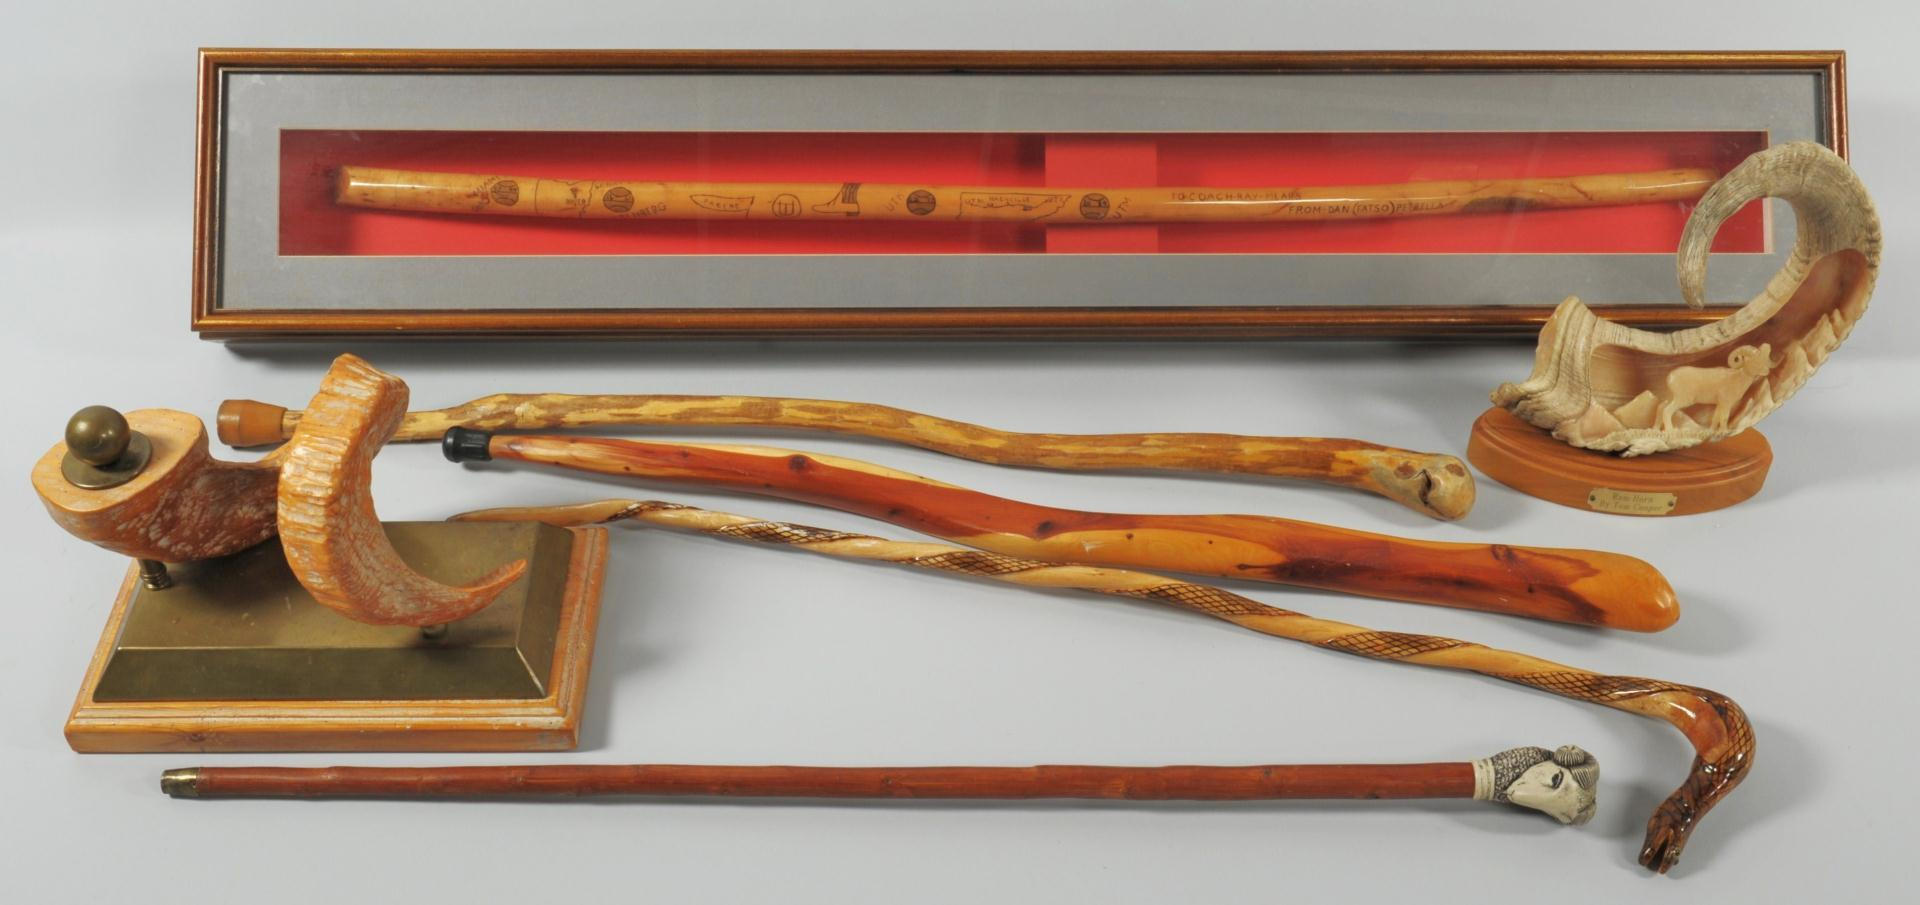 Lot 605: Grouping of Ray Mears decorative items. 2 ram horn